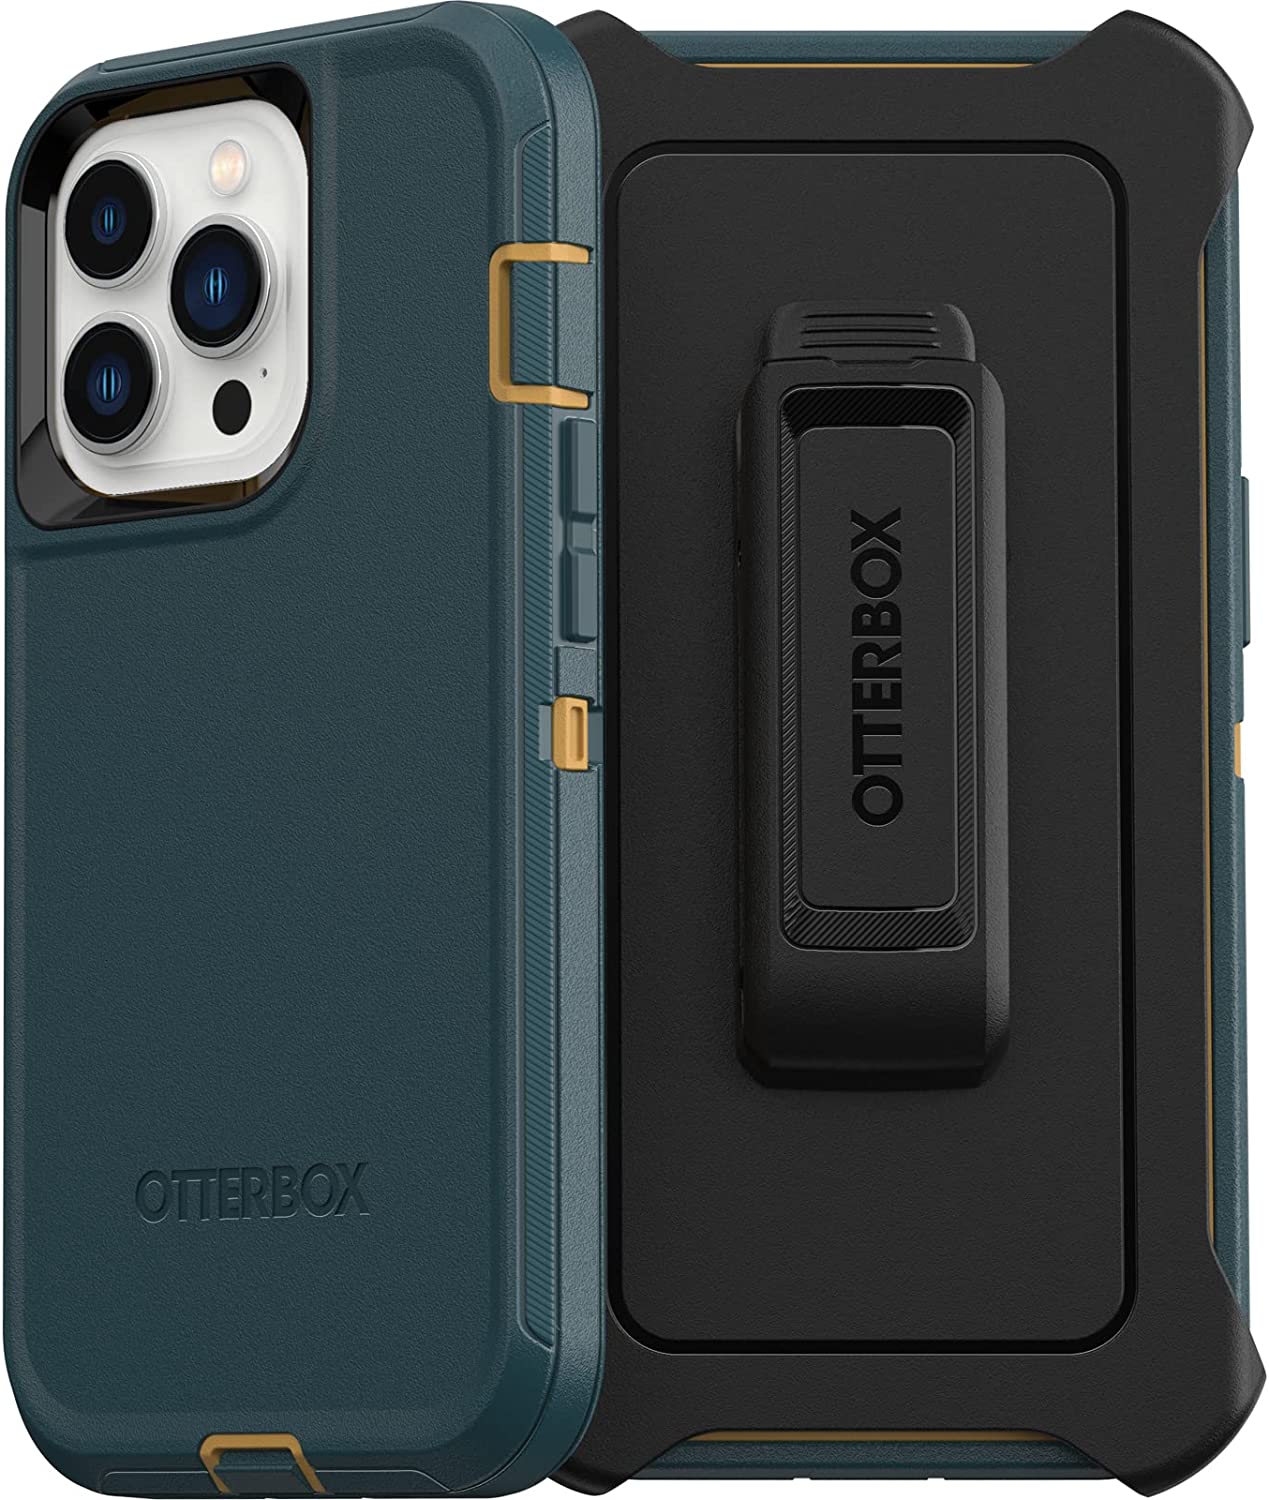 OtterBox DEFENDER SERIES Case for Apple iPhone 13 Pro - Hunter Green (Certified Refurbished)